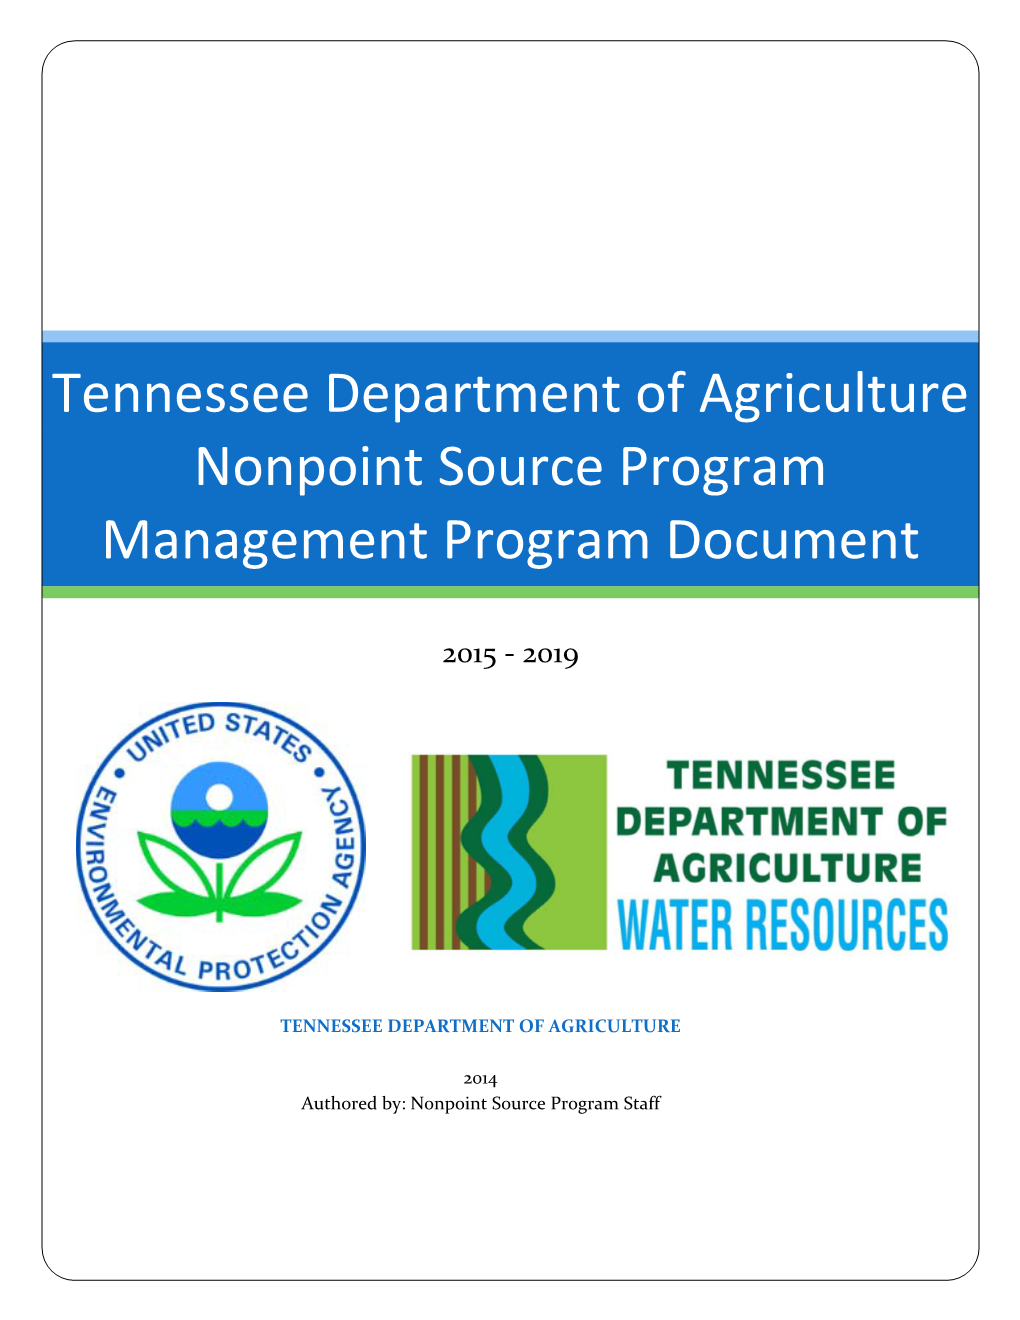 Tennessee Department of Agriculture Nonpoint Source Program Management Program Document